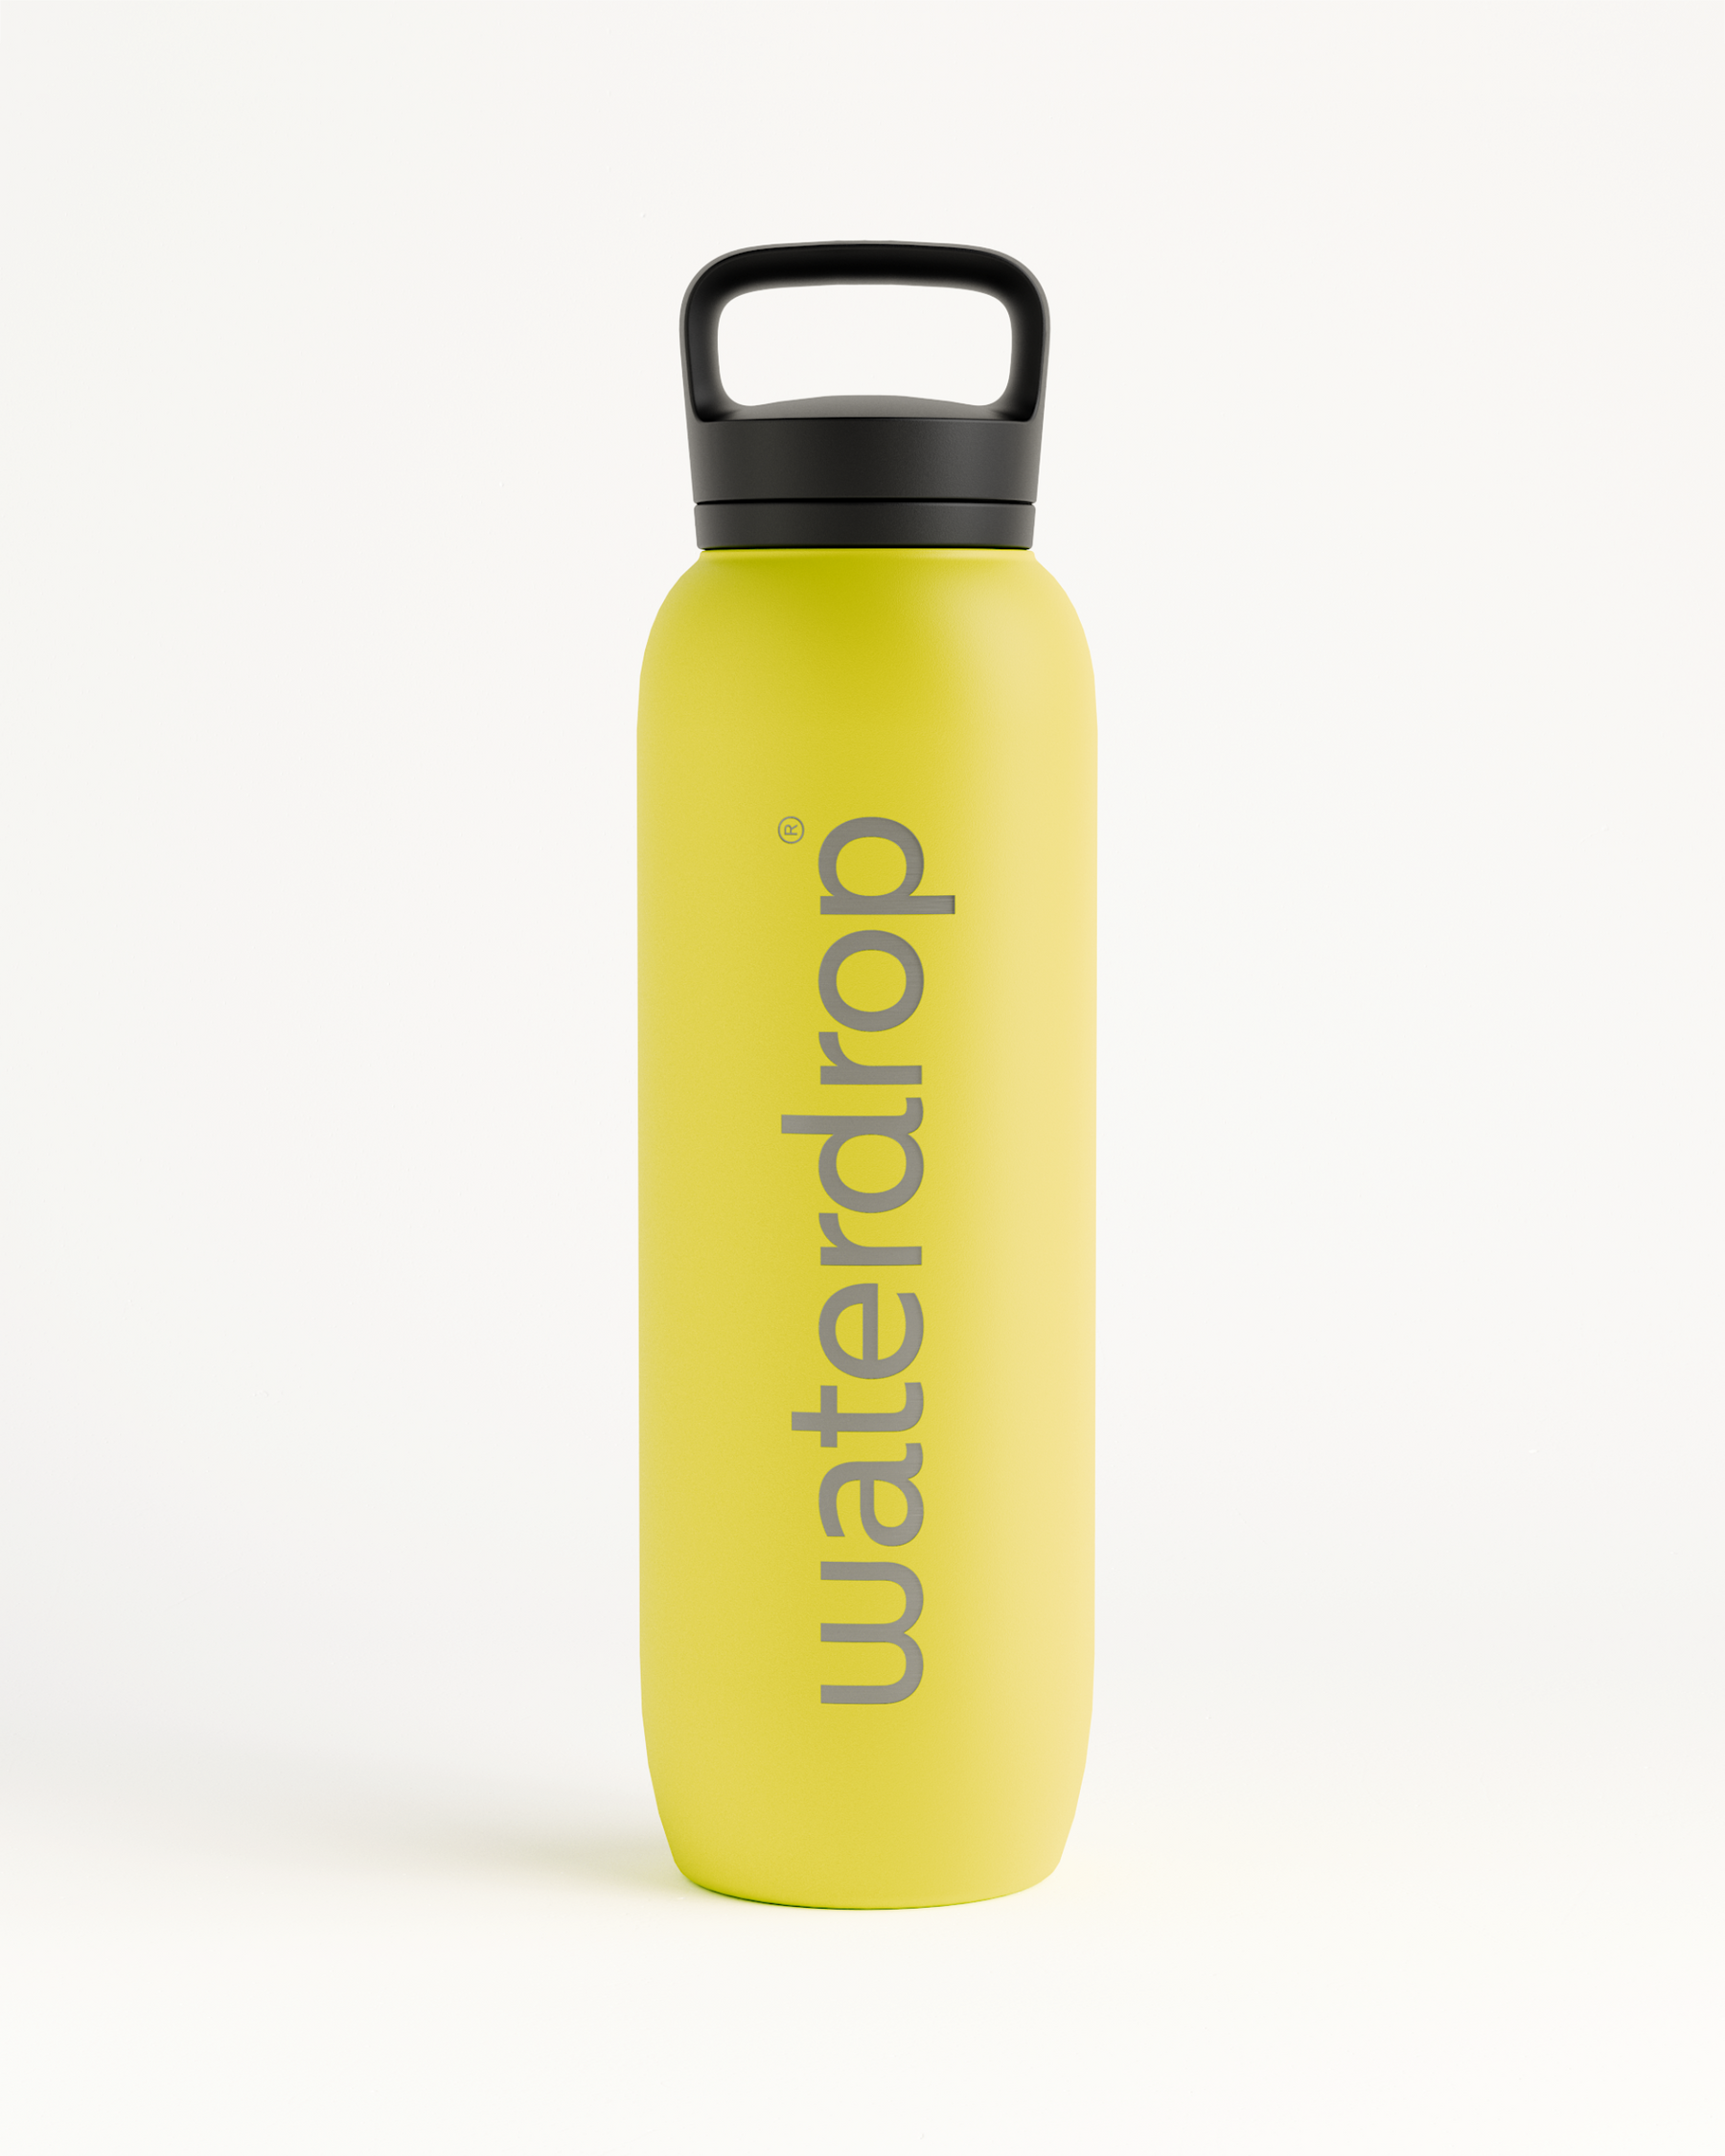 Cup Thermal Water Bottle Thermos with Spout Lid Drink Stainless